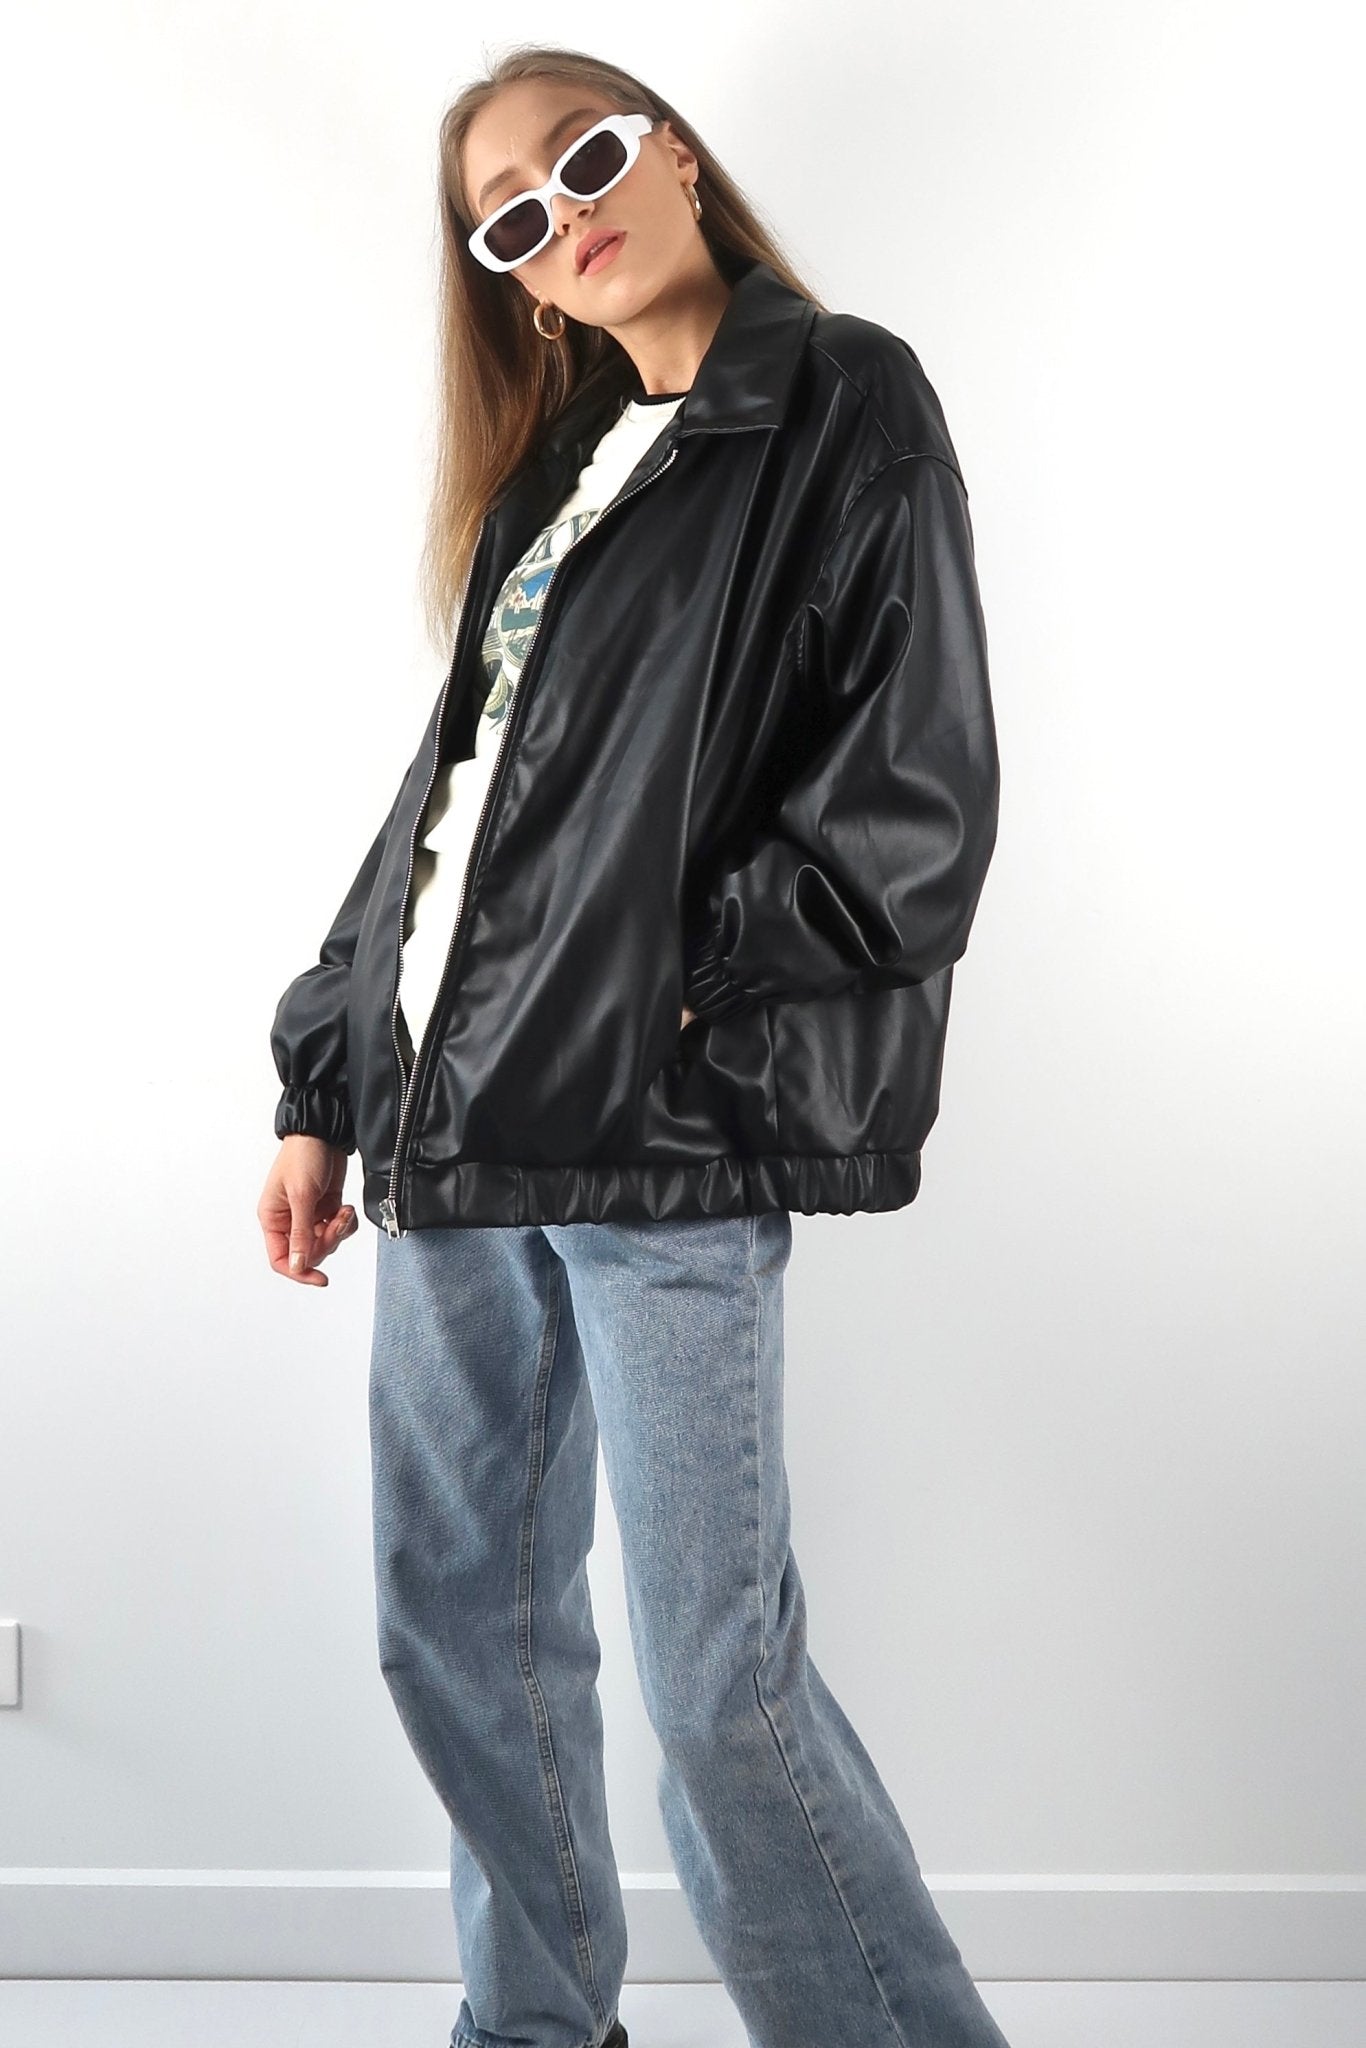 Faux leather zip up jacket - SCG_COLLECTIONSOuterwear